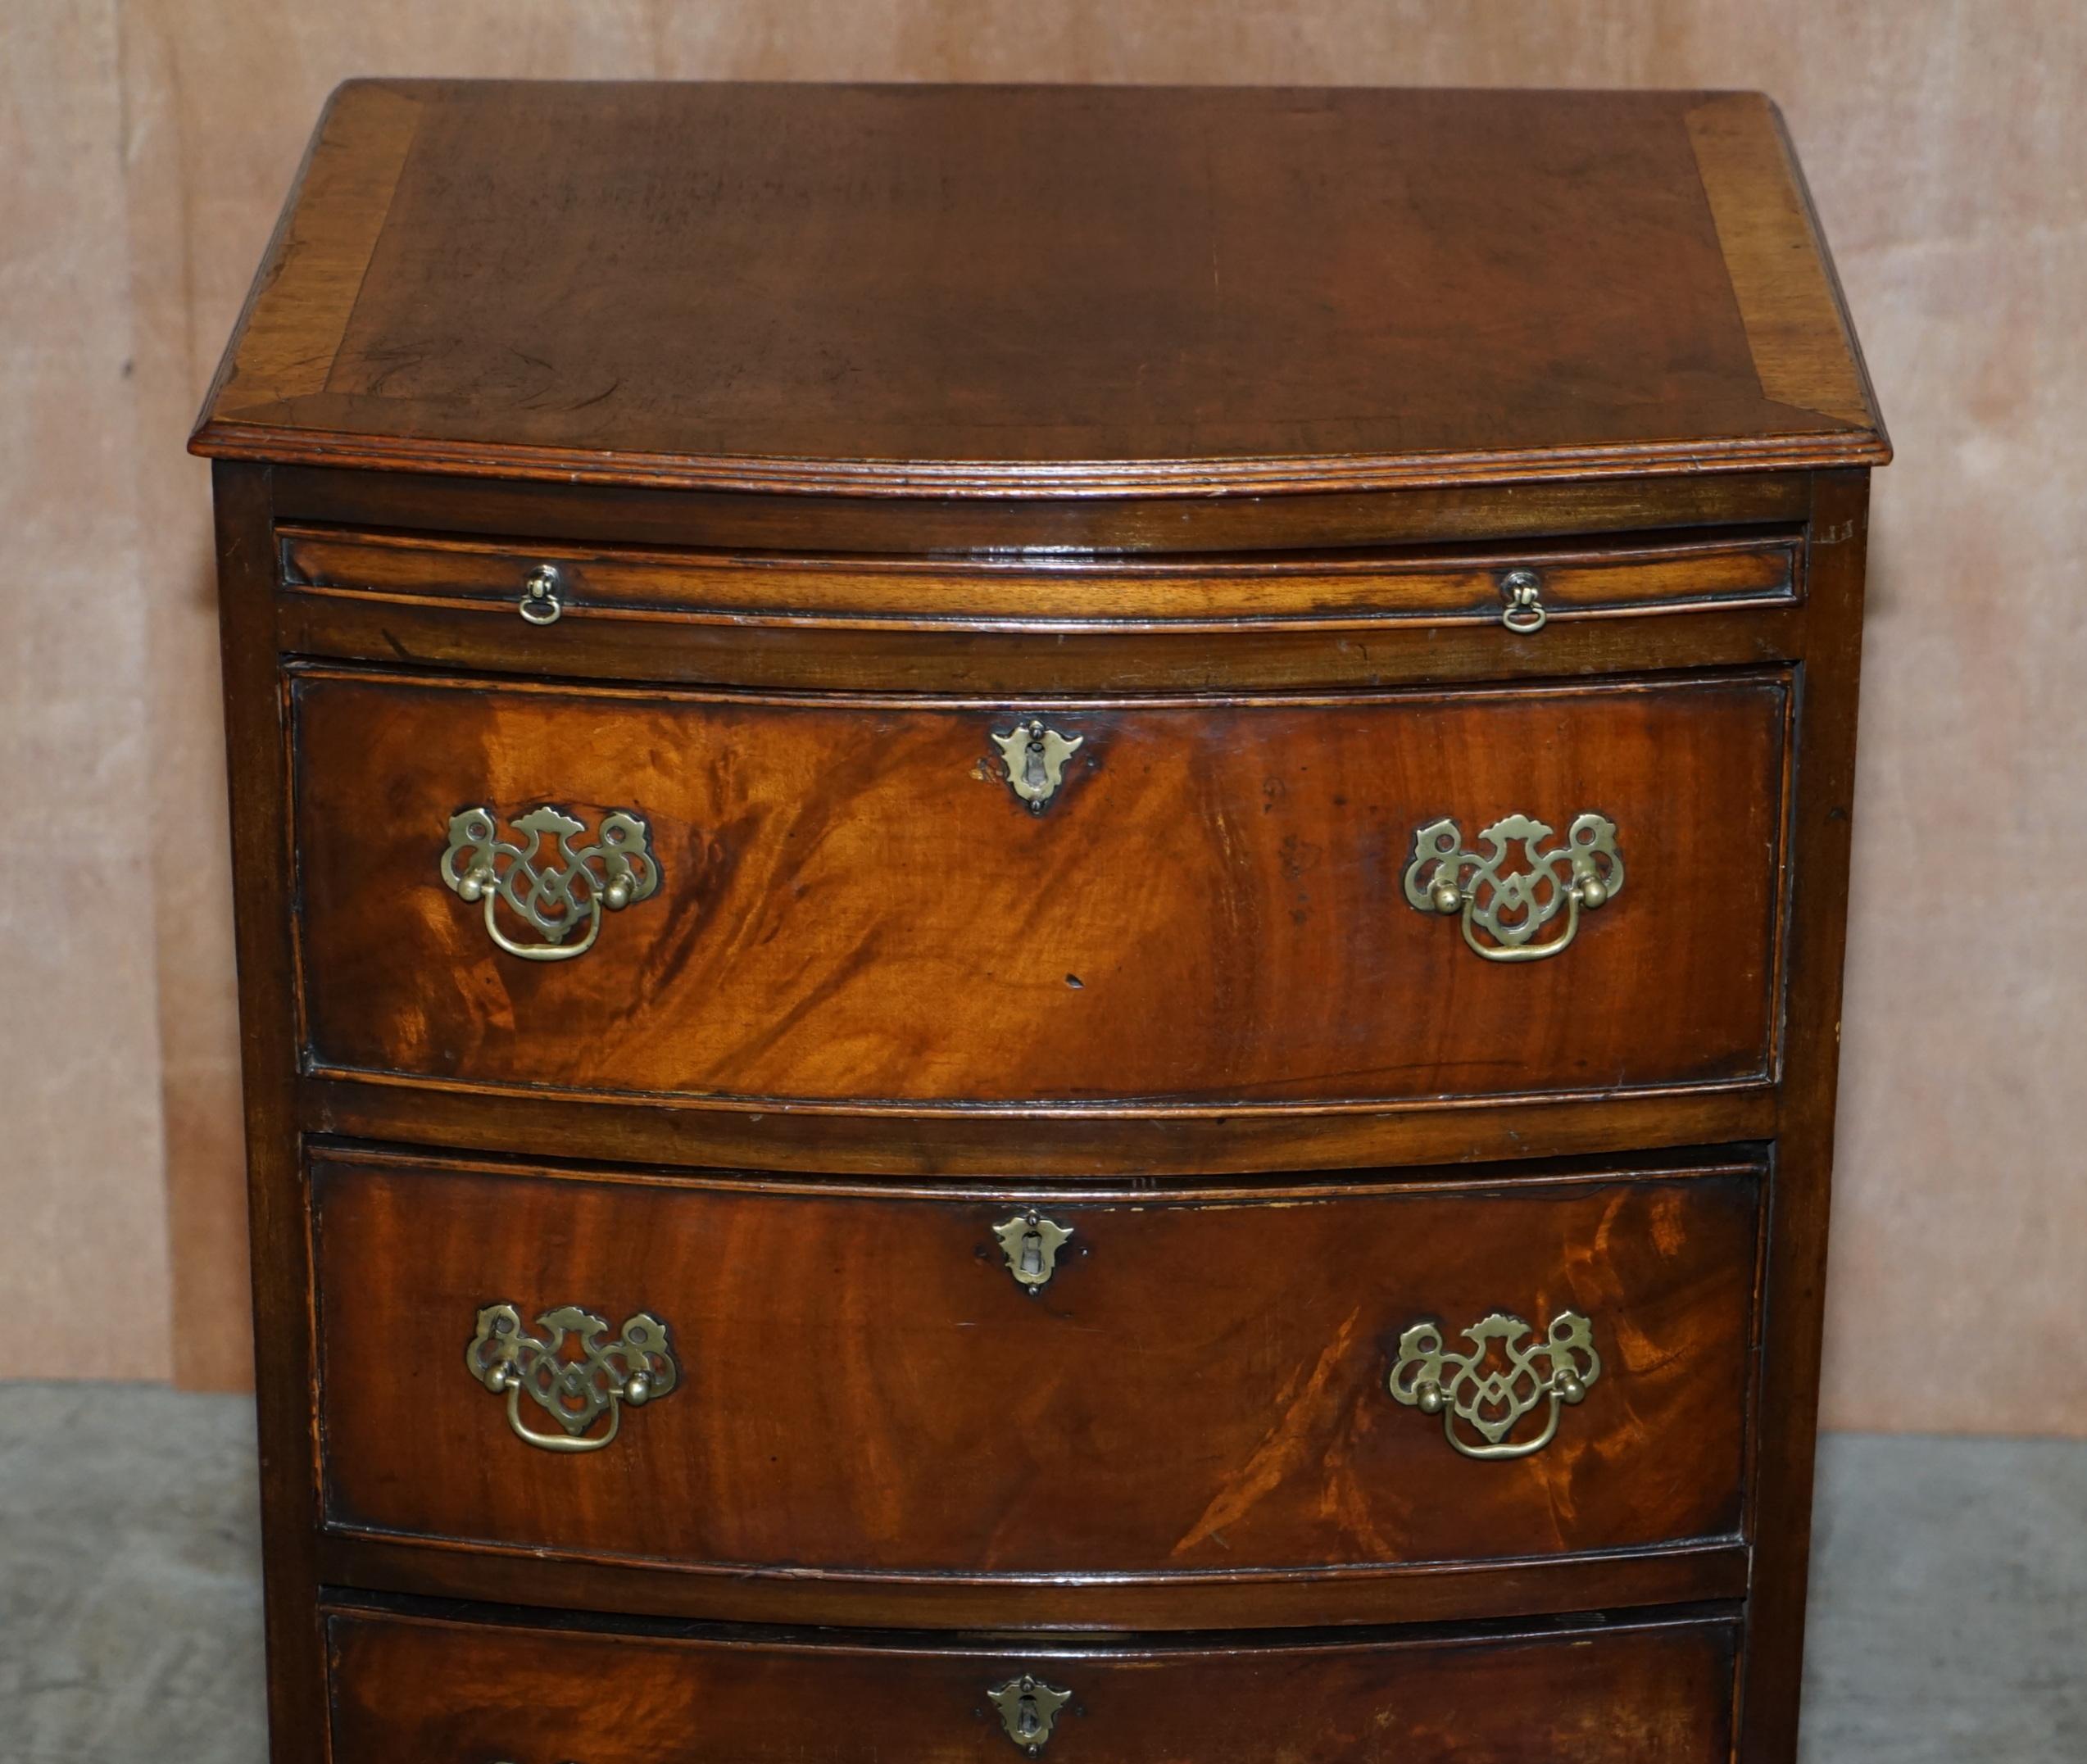 Hand-Crafted Large Side Table Sized Bow Fronted Chest of Drawers Made in the Georgian Manner